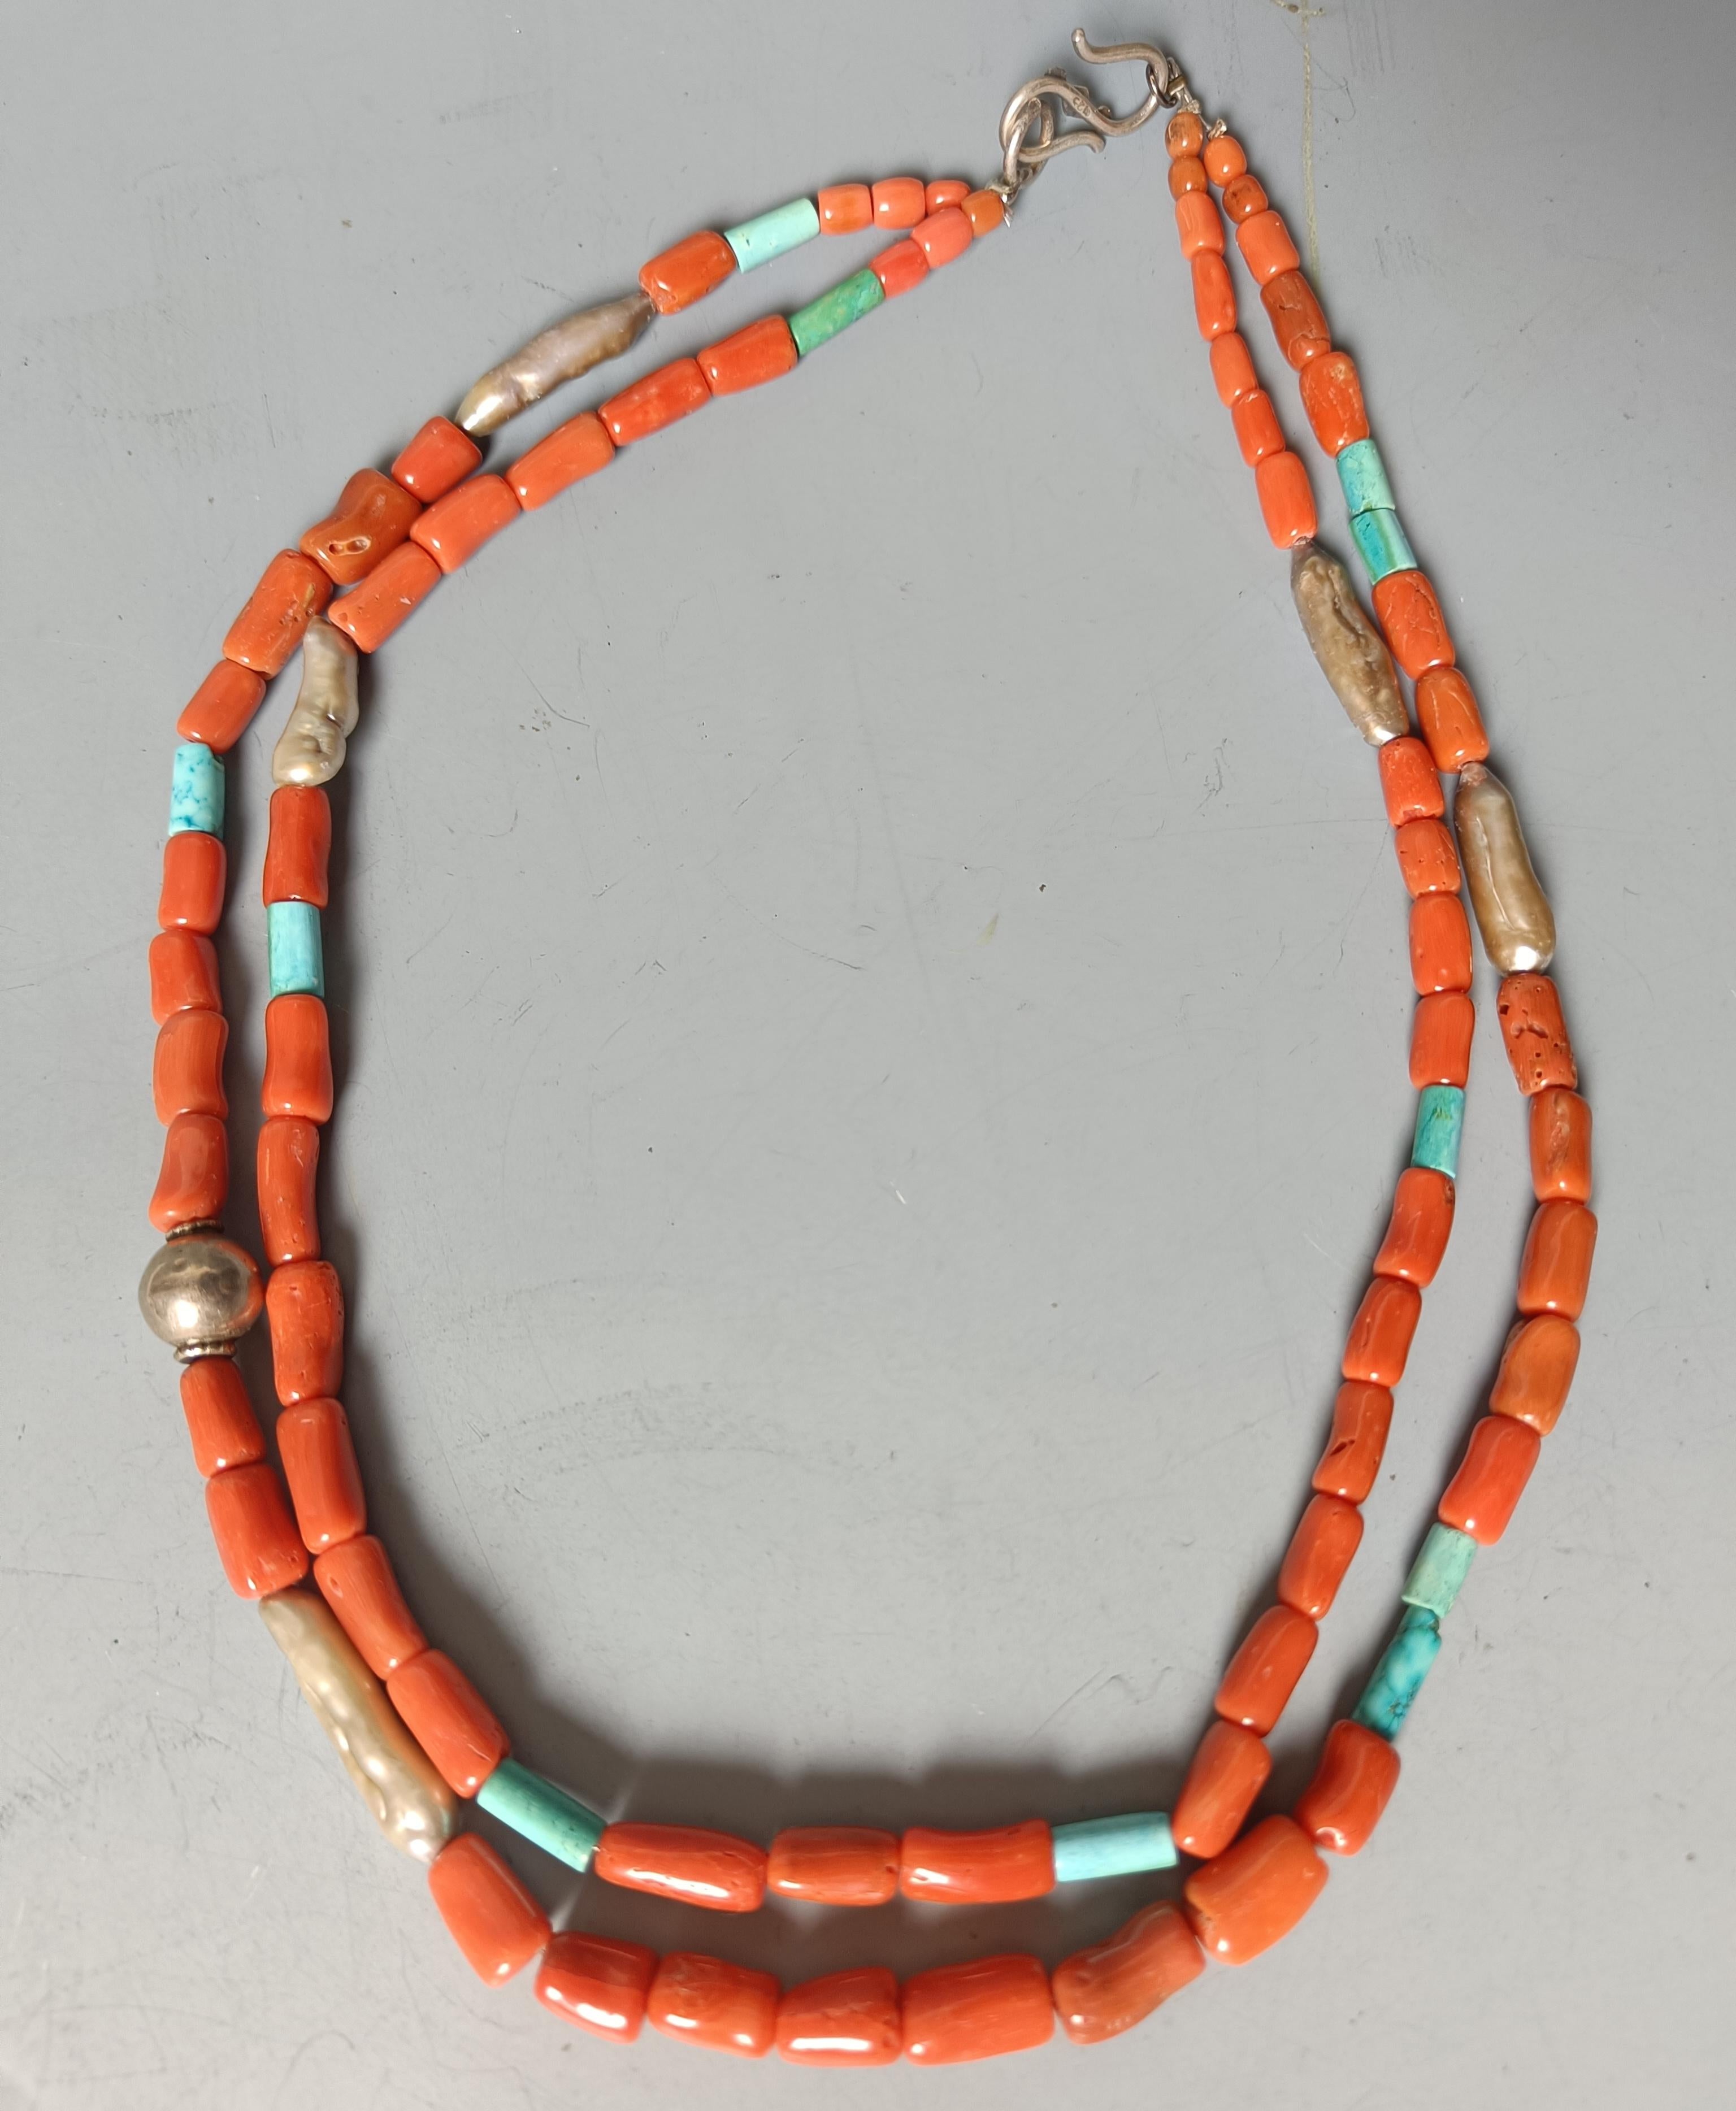 Large Vintage Native American South West style Coral turquoise Necklace
A double string of Large high quality natural red coral beads with turquoise and natural elongated pearls
Vintage Circa 1960`s  or earlier, coral beads size 1 cm x 6 mm average
